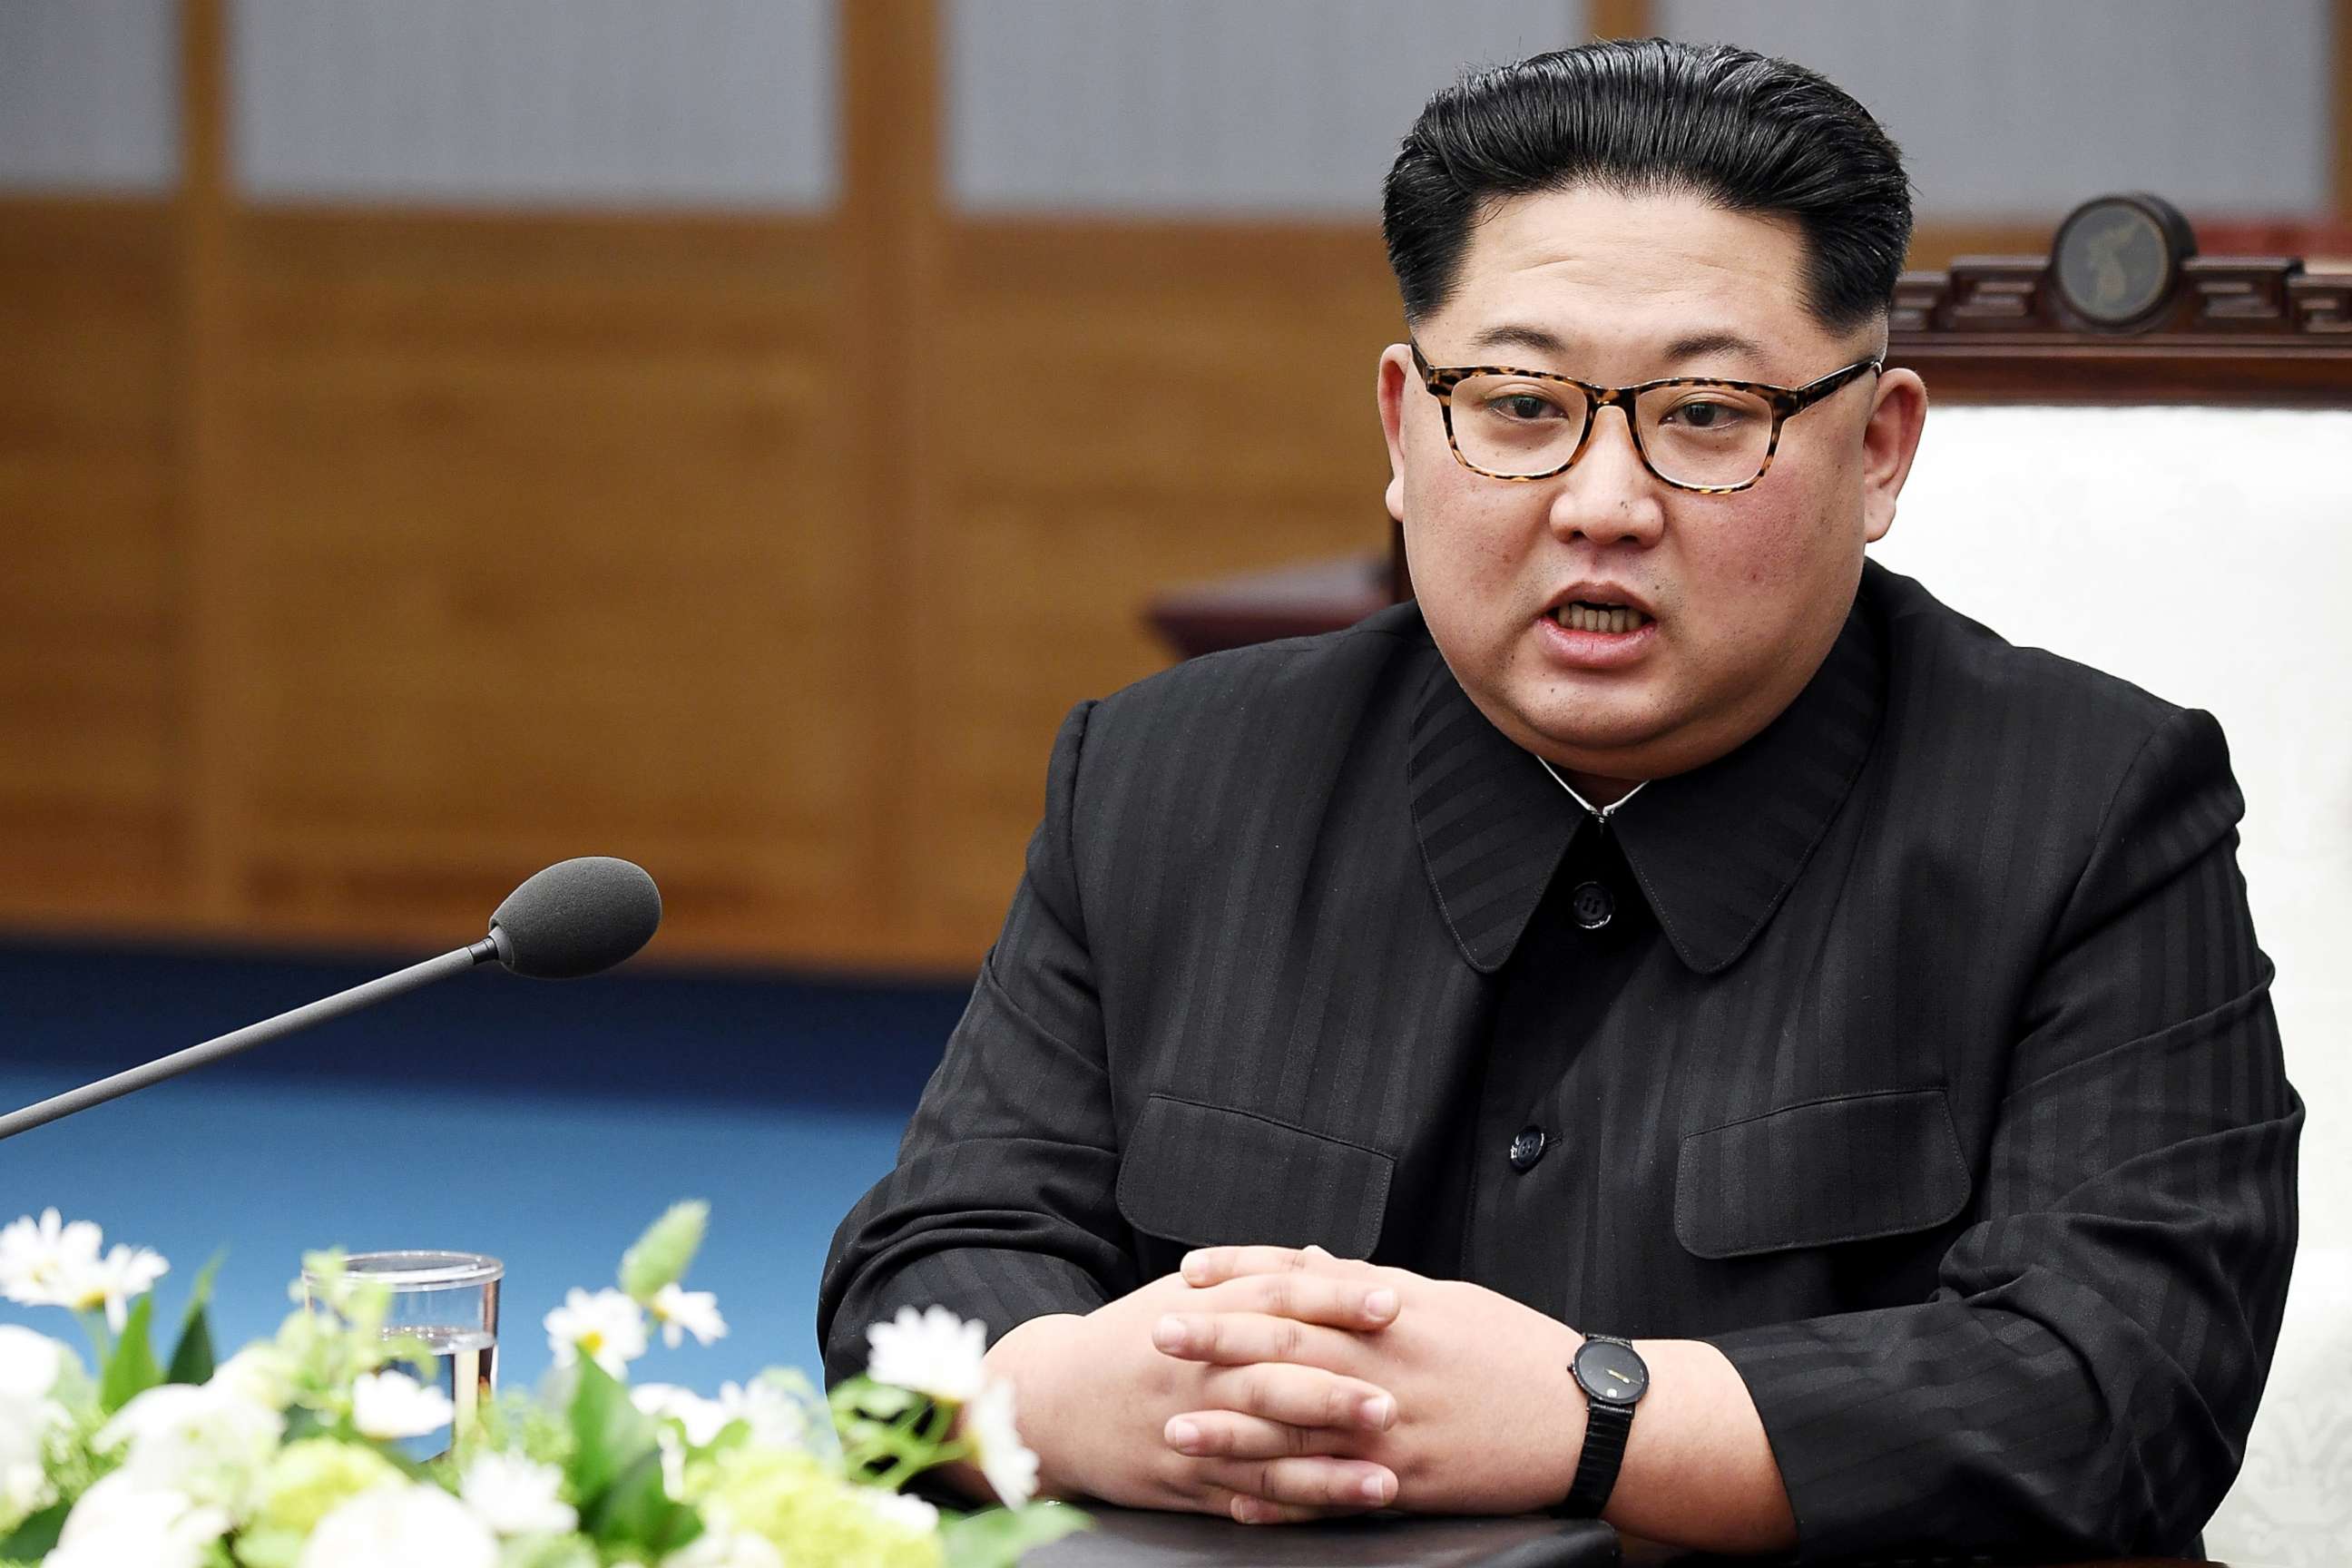 PHOTO: North Koraen Leader Kim Jong Un speaks during the Inter-Korean Summit at the Peace House on April 27, 2018 in Panmunjom, South Korea.